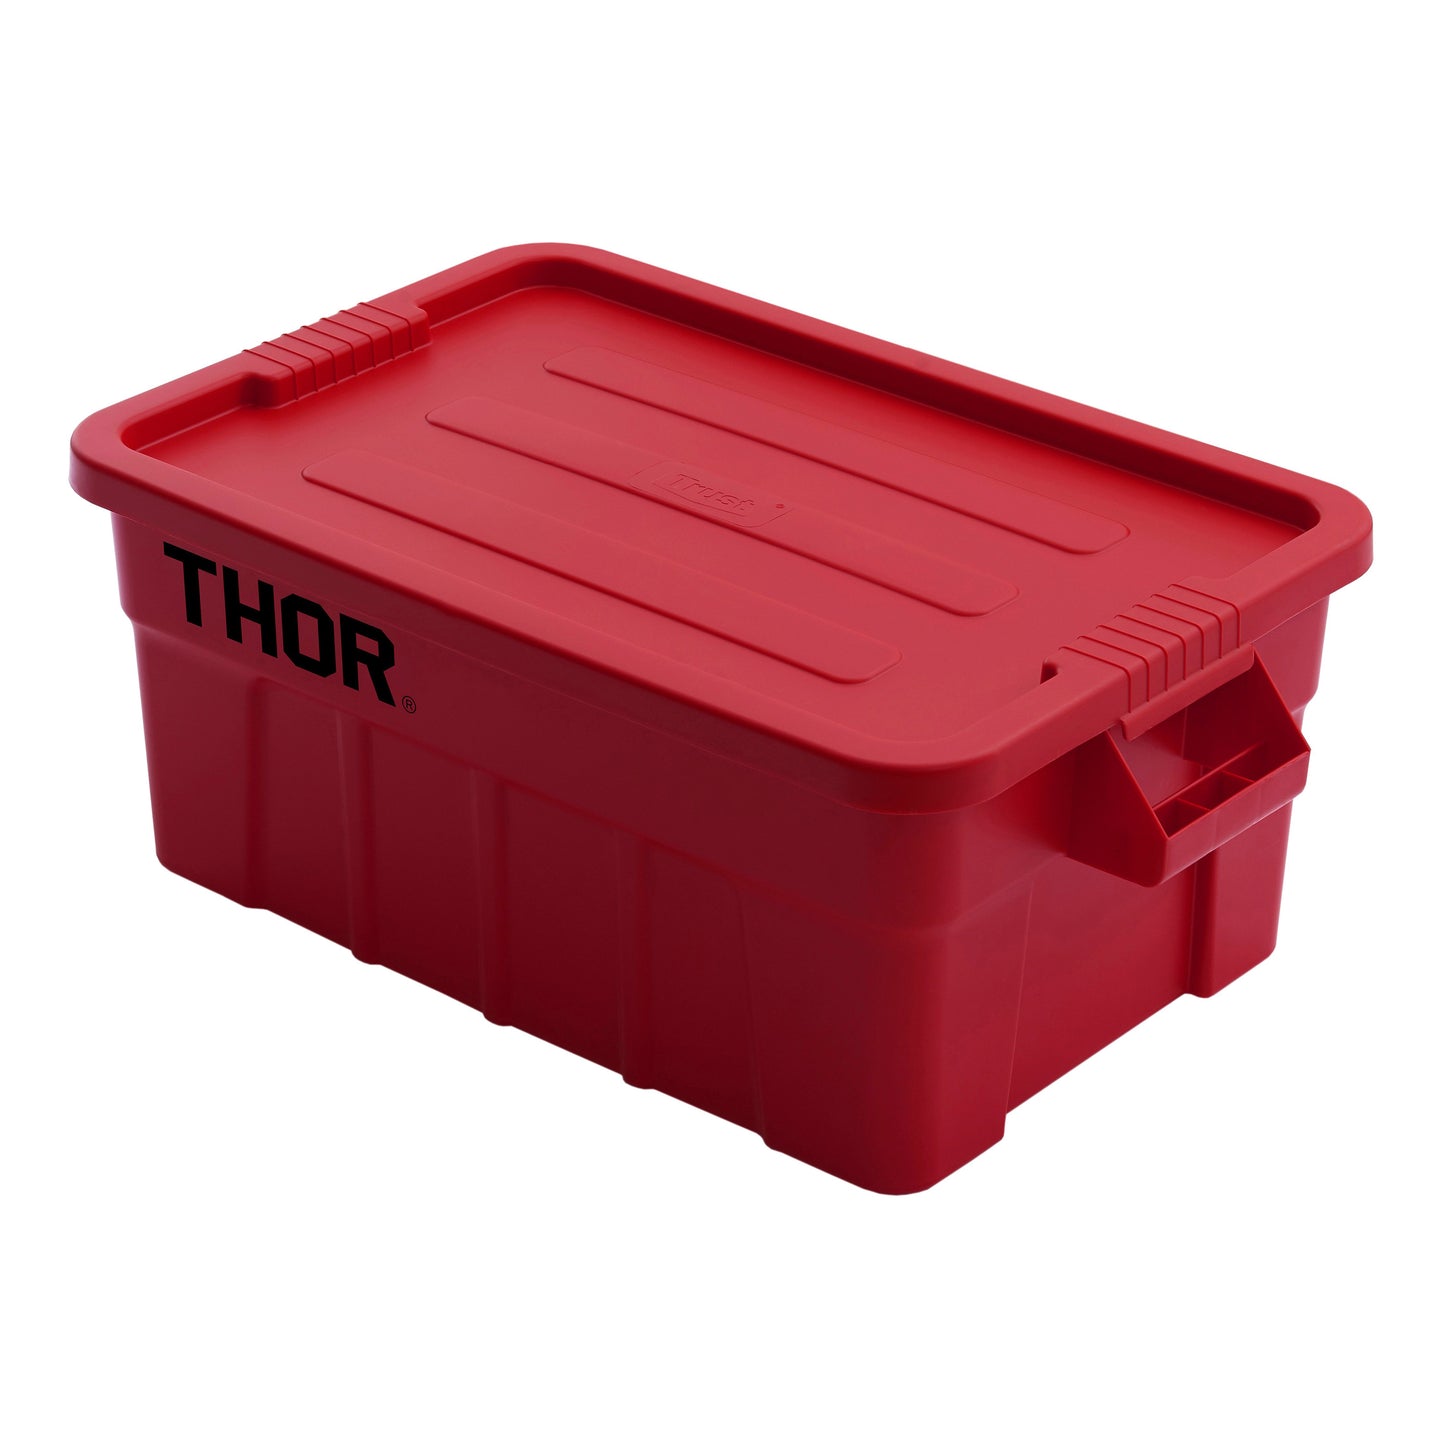 53L THOR Stackable Storage Box